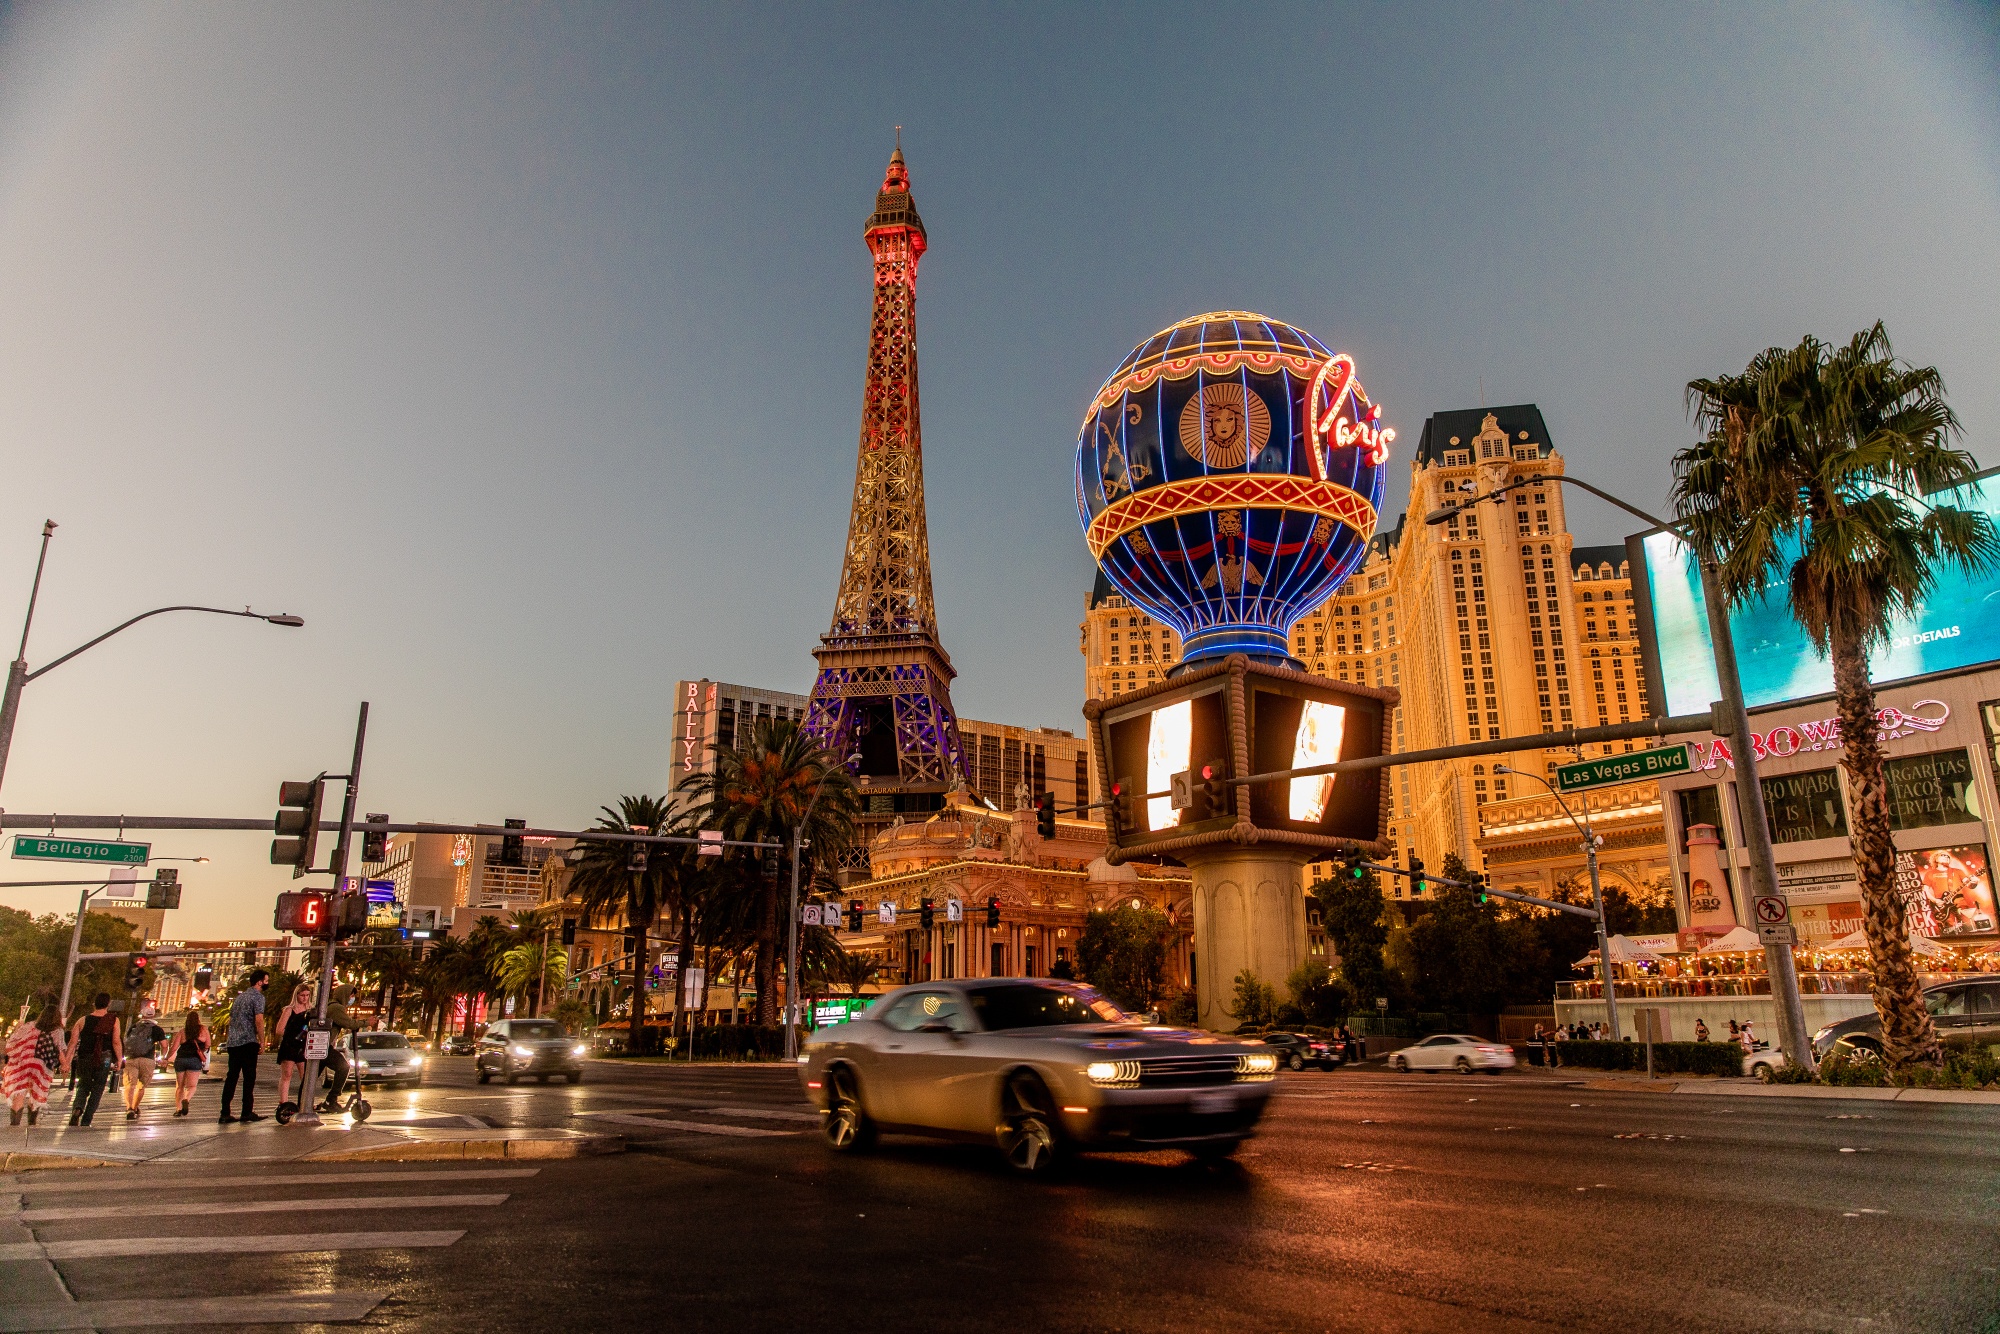 6 Ways to Find Old Western Culture in Vegas